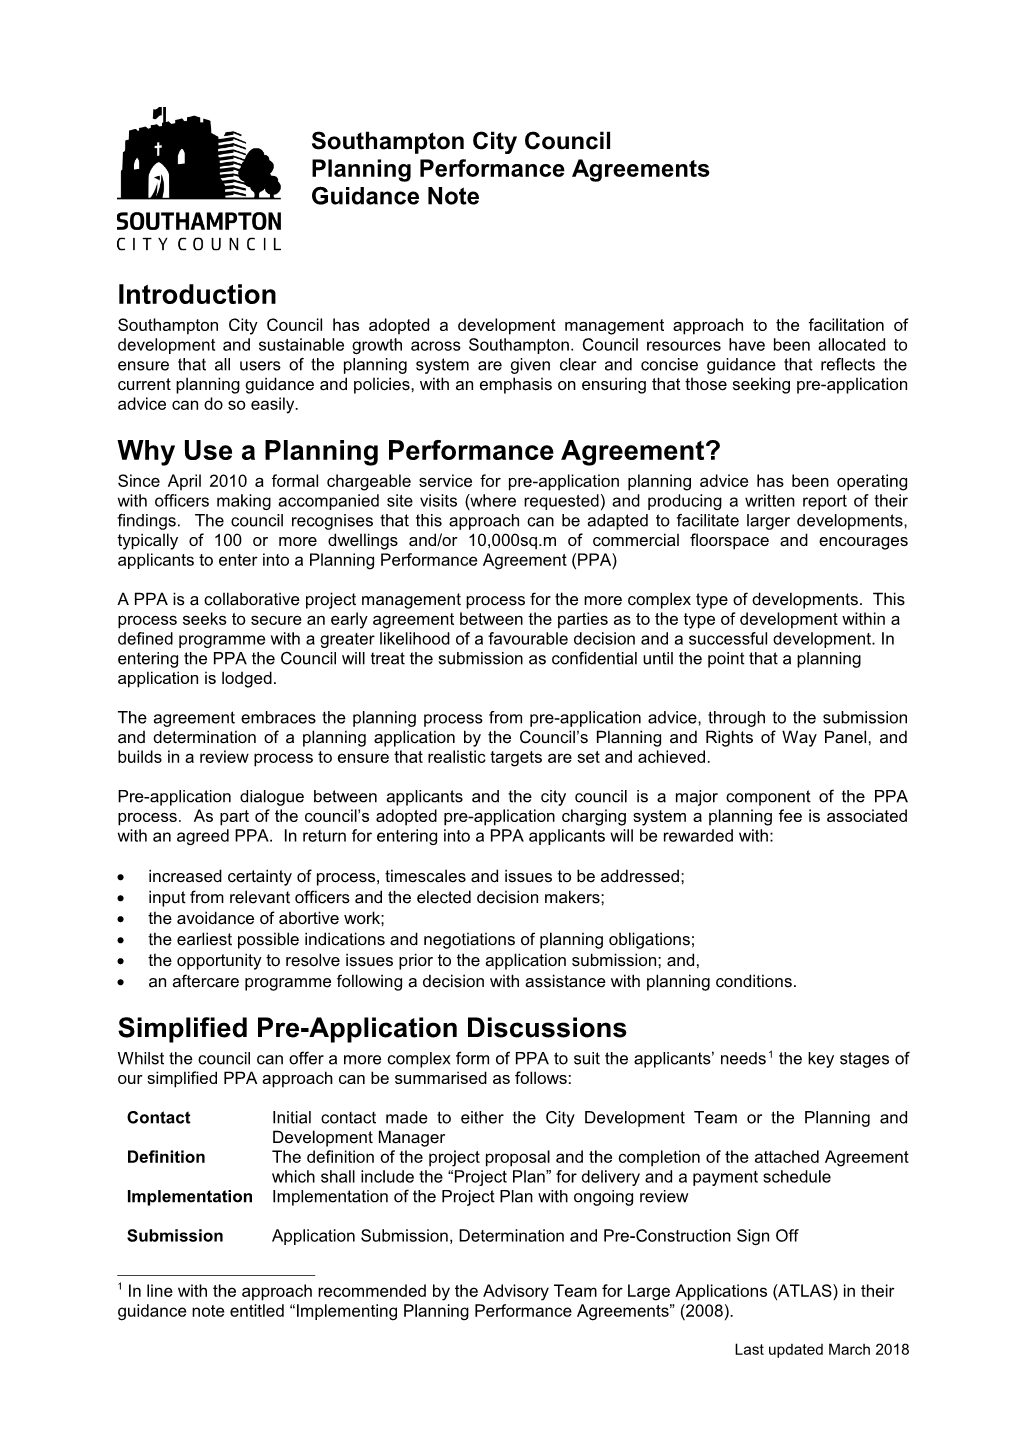 Why Use a Planning Performance Agreement?